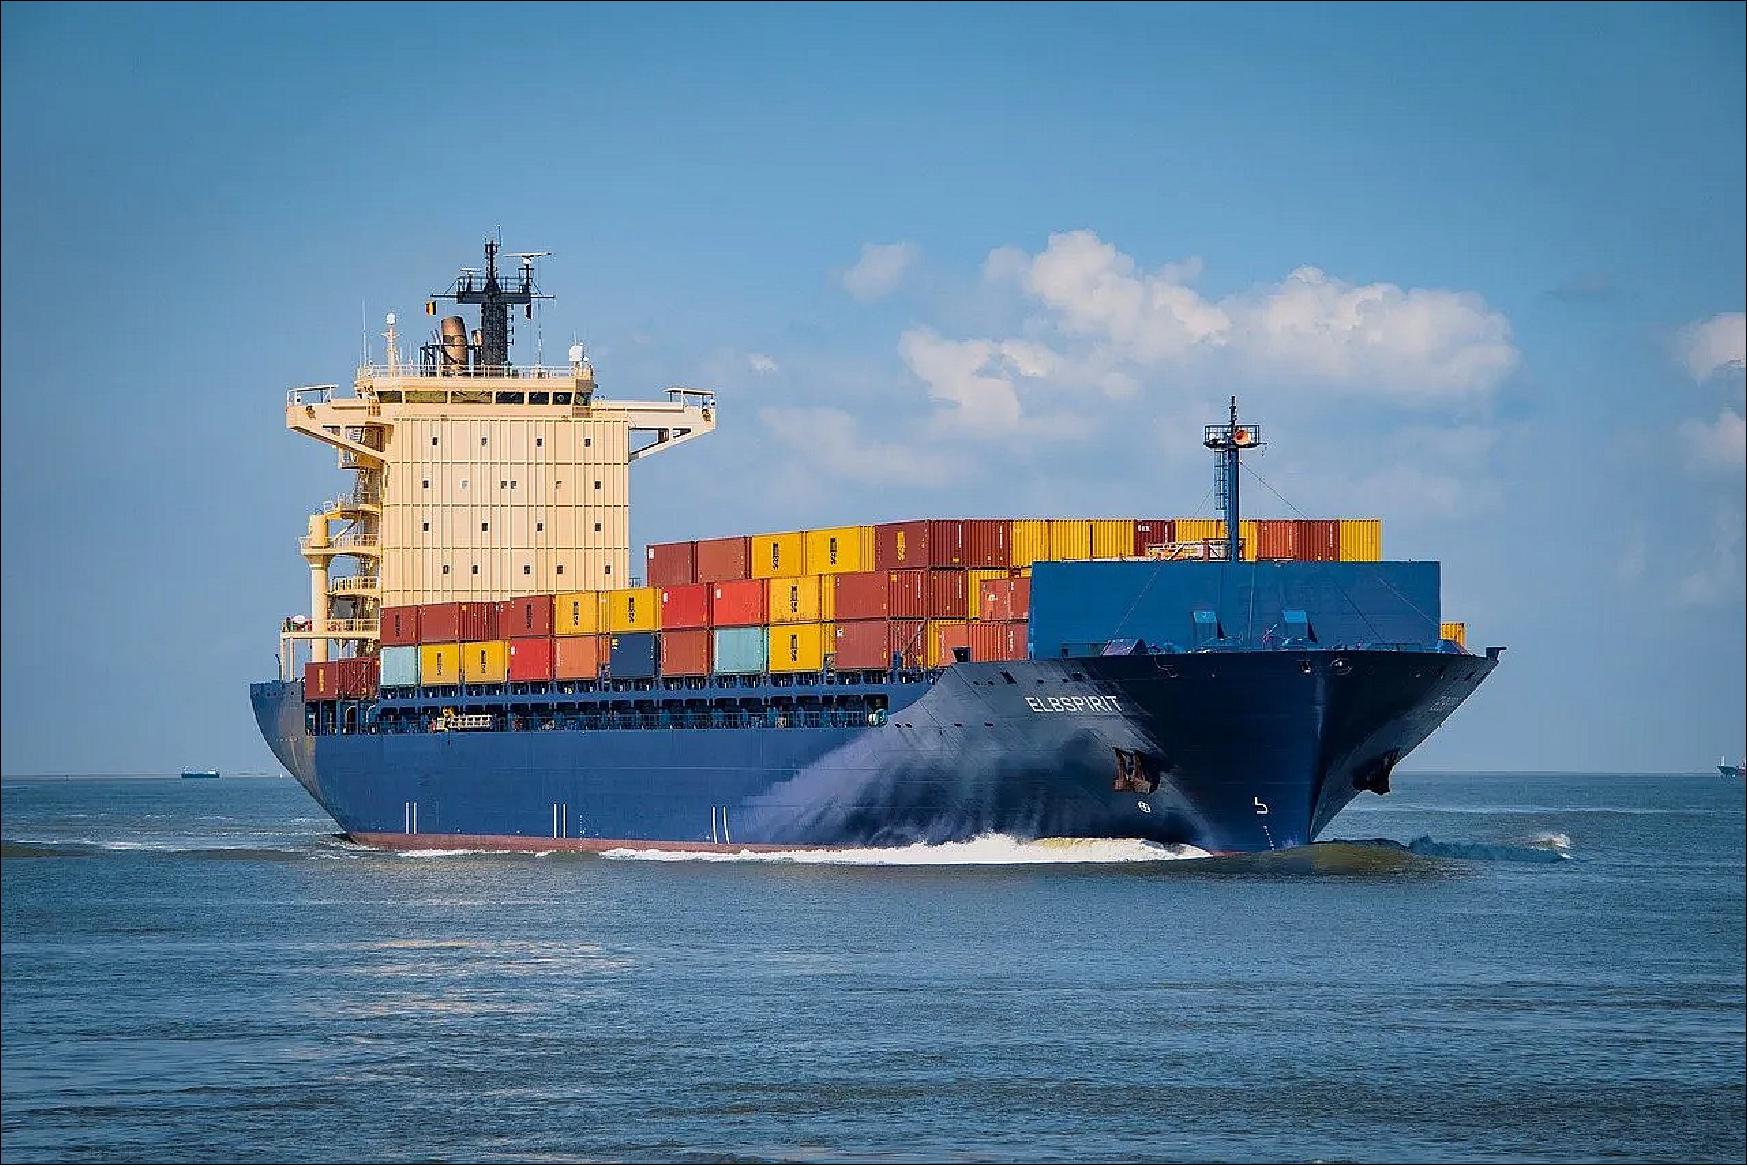 Figure 90: A new report indicates the urgent need for the development of policies that can close the competitiveness gap and accelerate the maritime zero-emission trajectory (image credit: VPO Global)